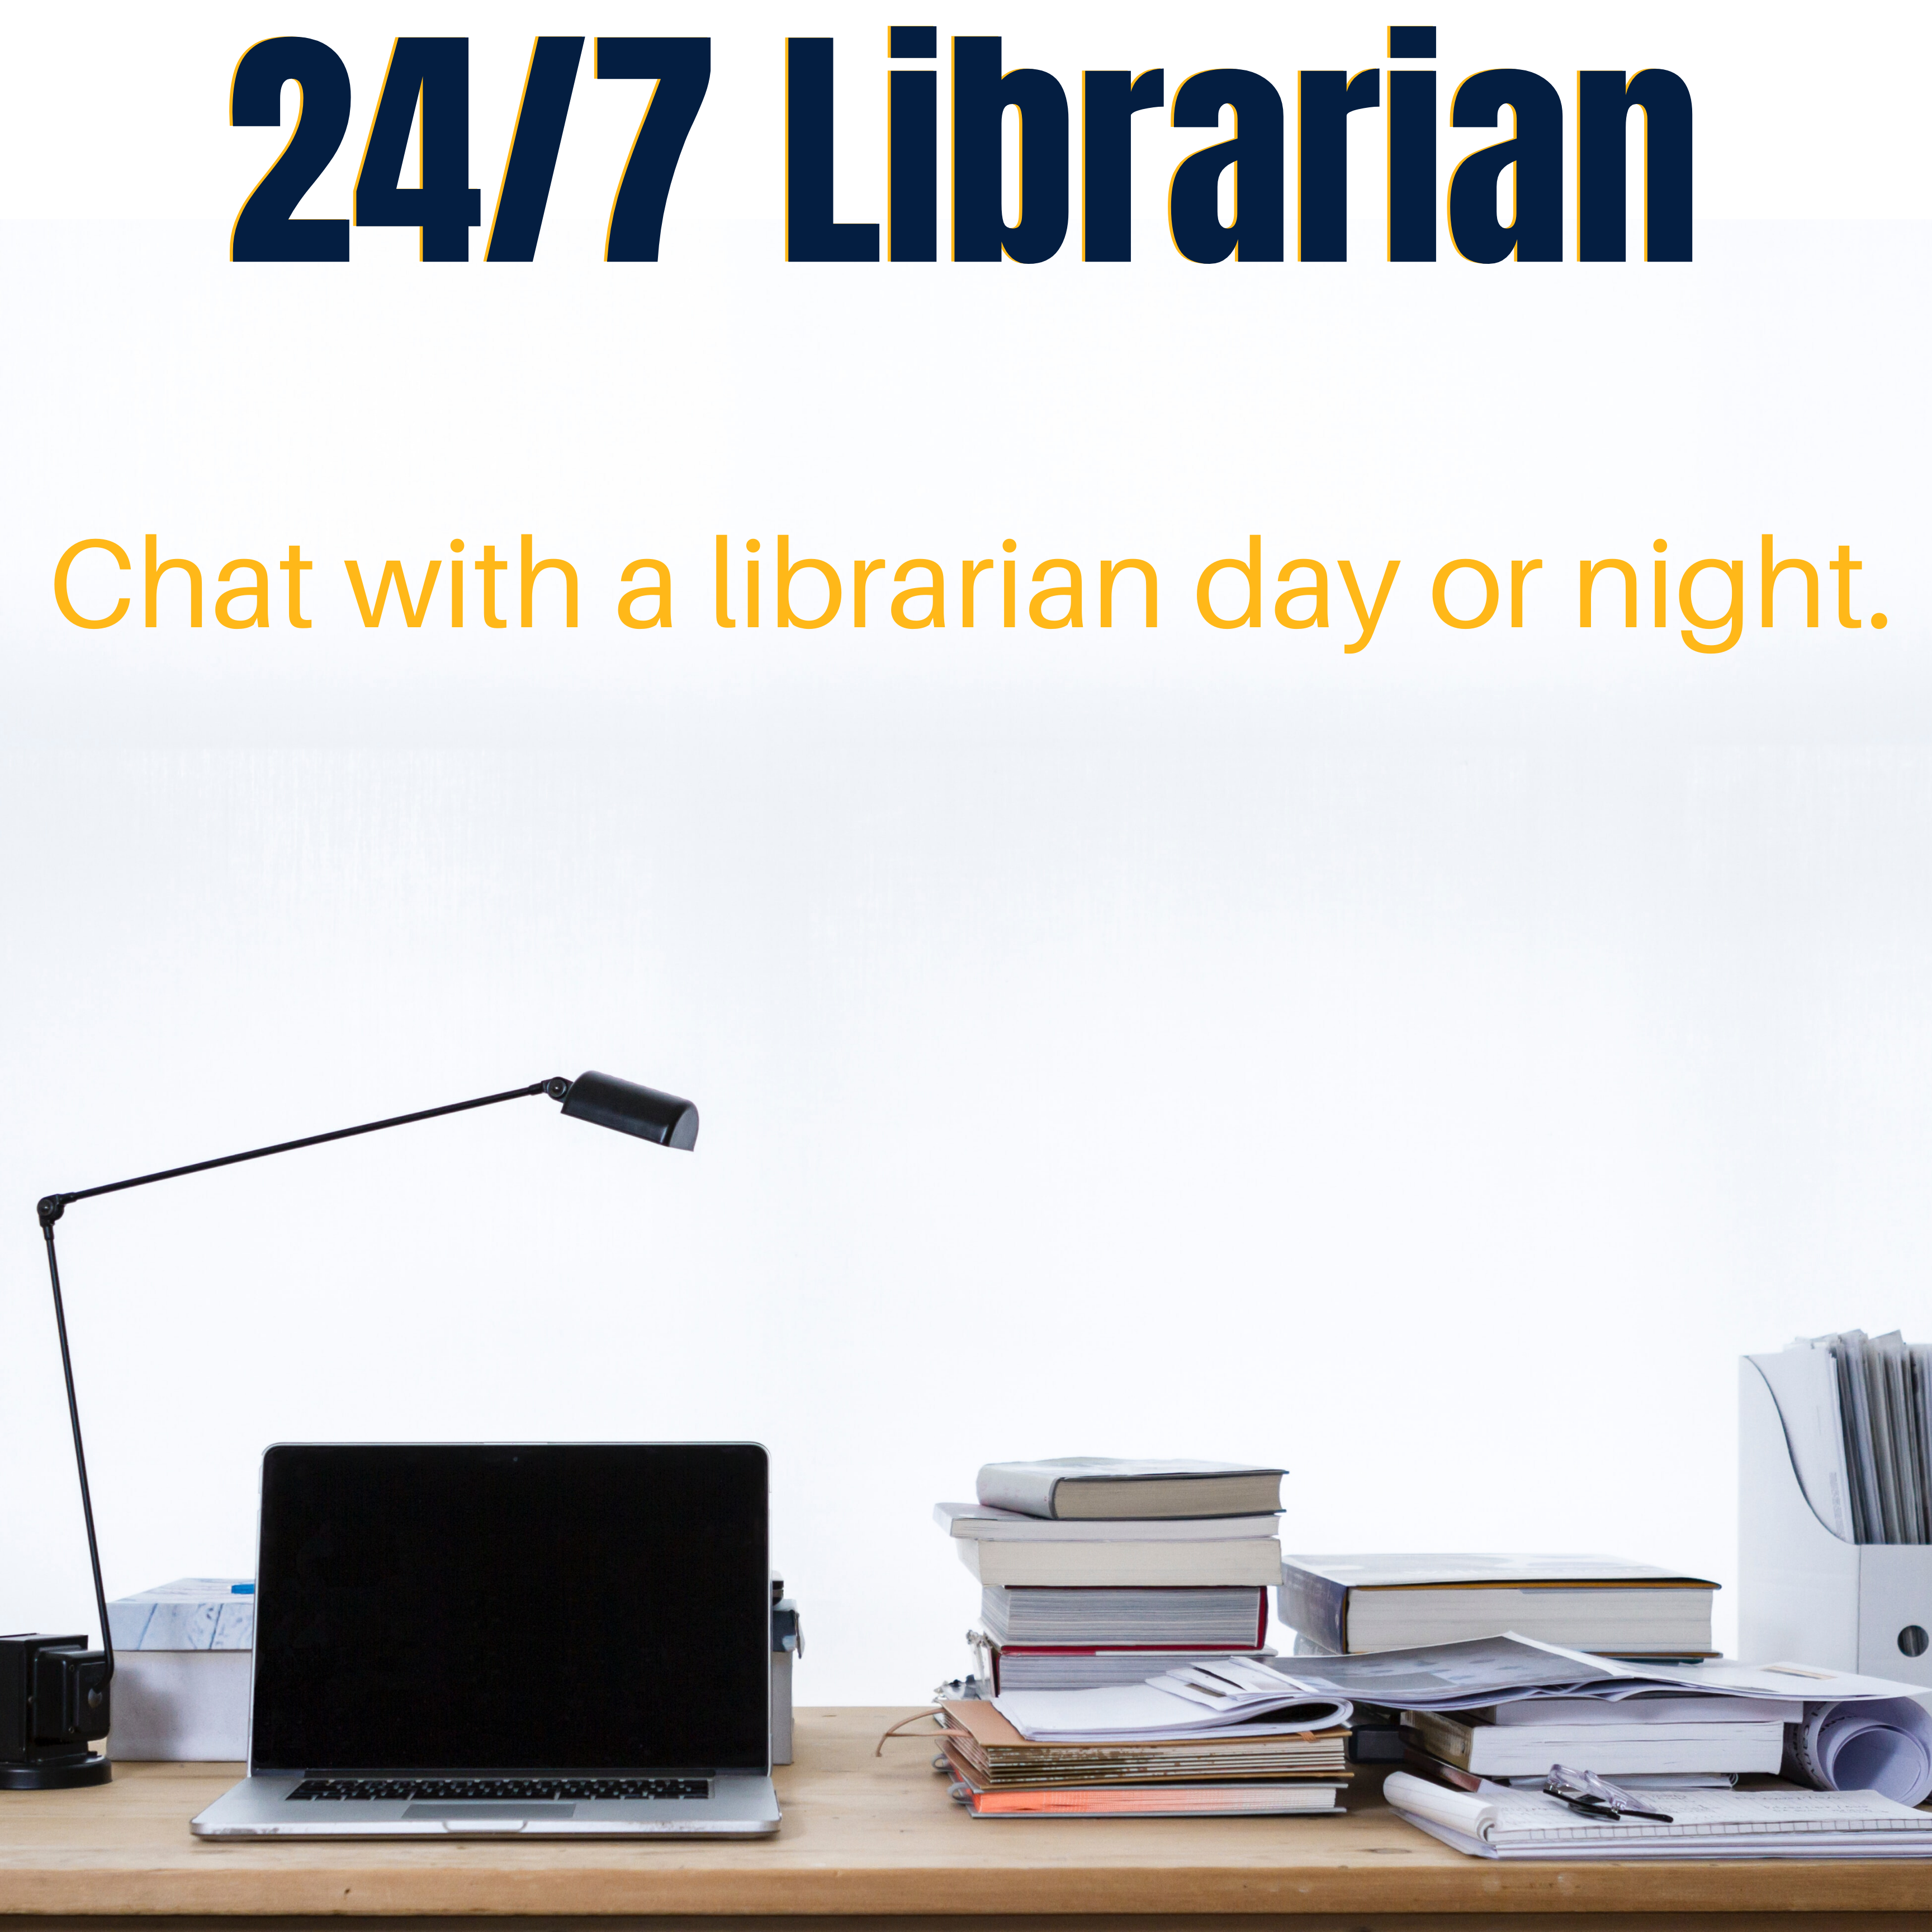 24/7 Librarian. Chat with a librarian day or night.